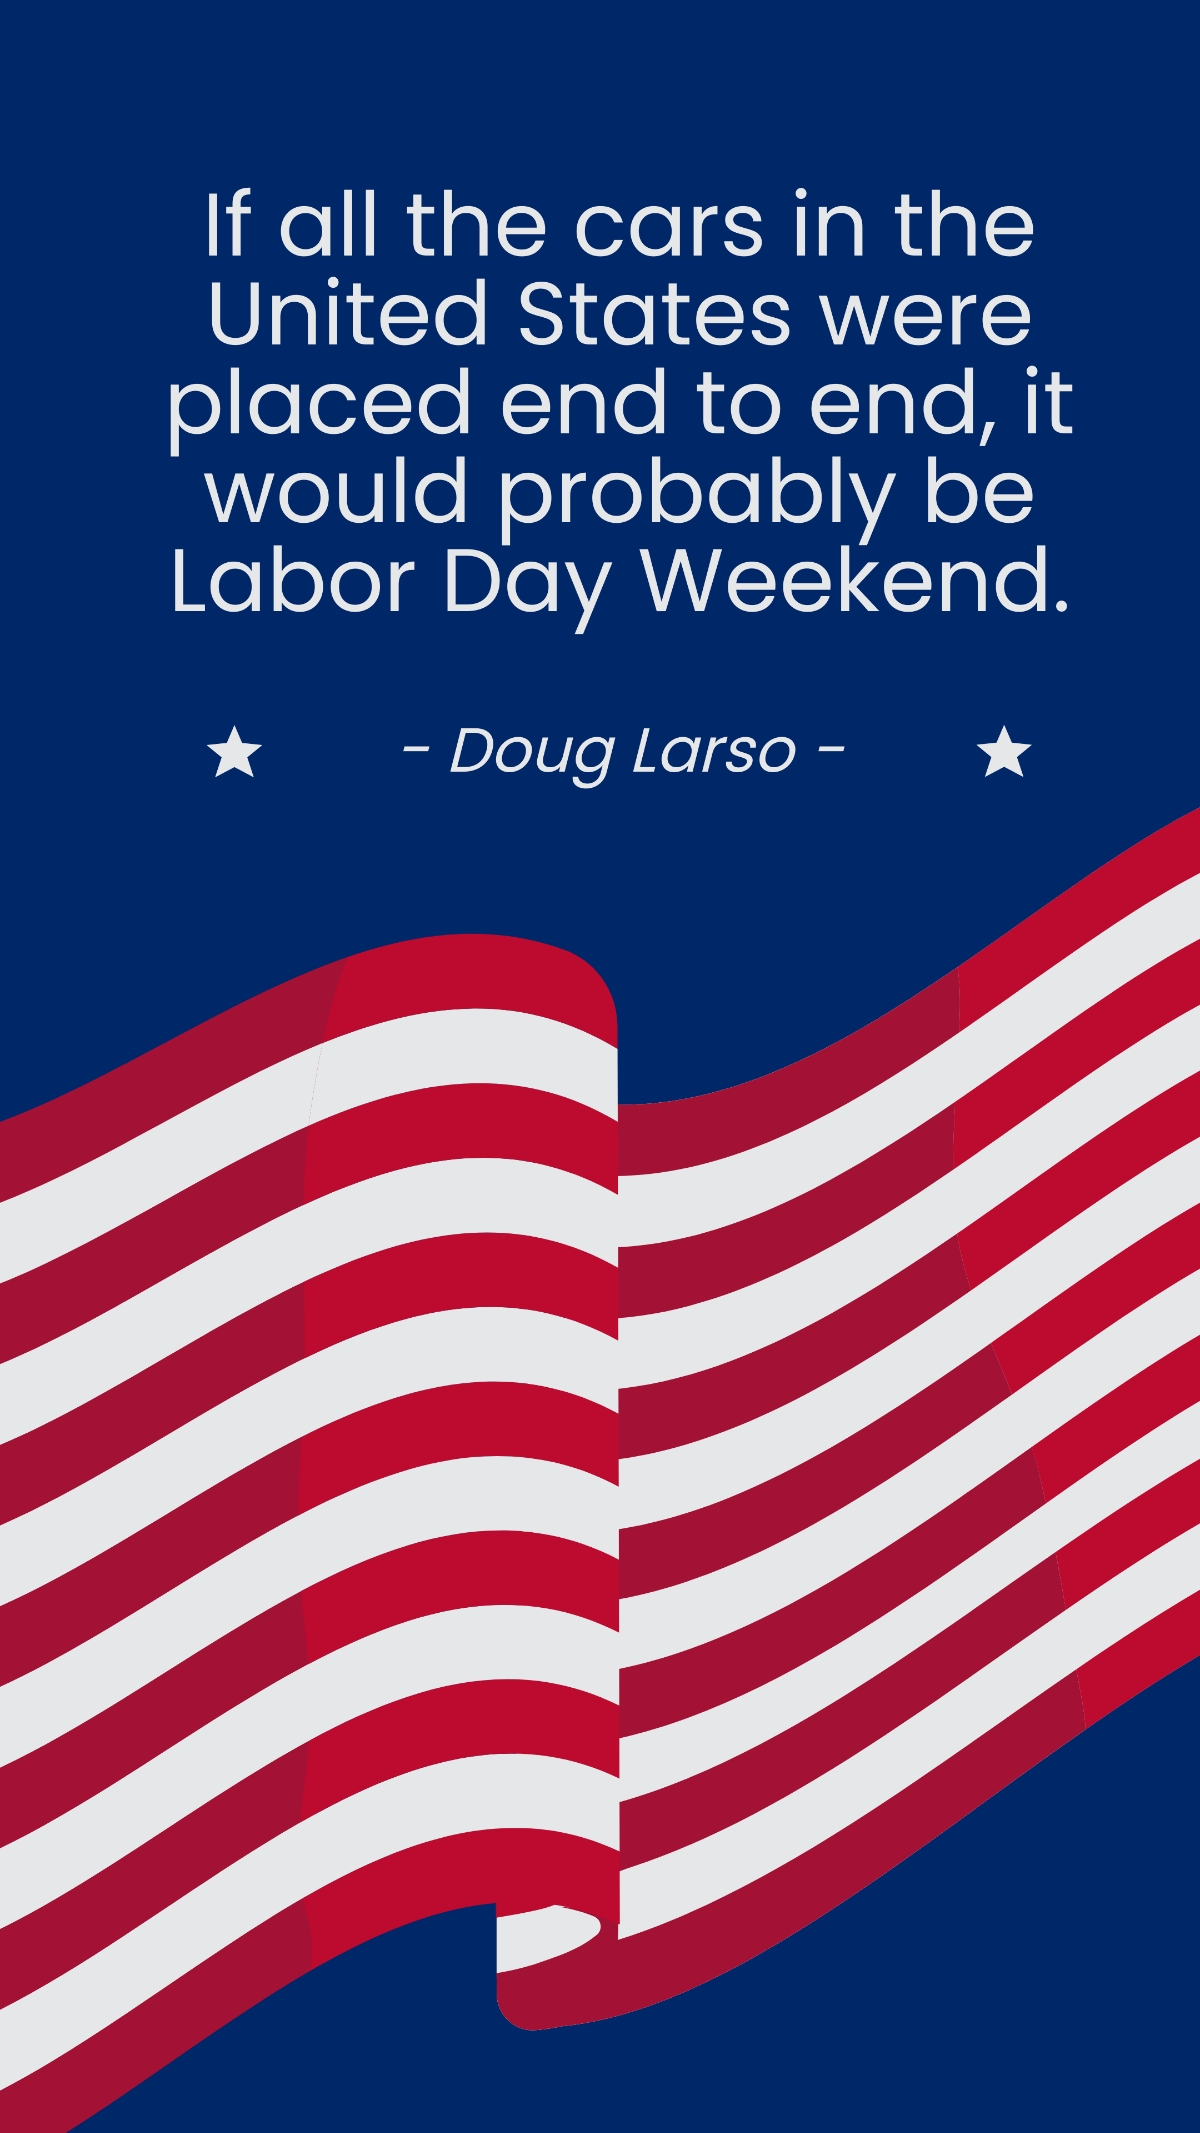 Free Doug Larso - If all the cars in the United States were placed end to end, it would probably be Labor Day Weekend. Template